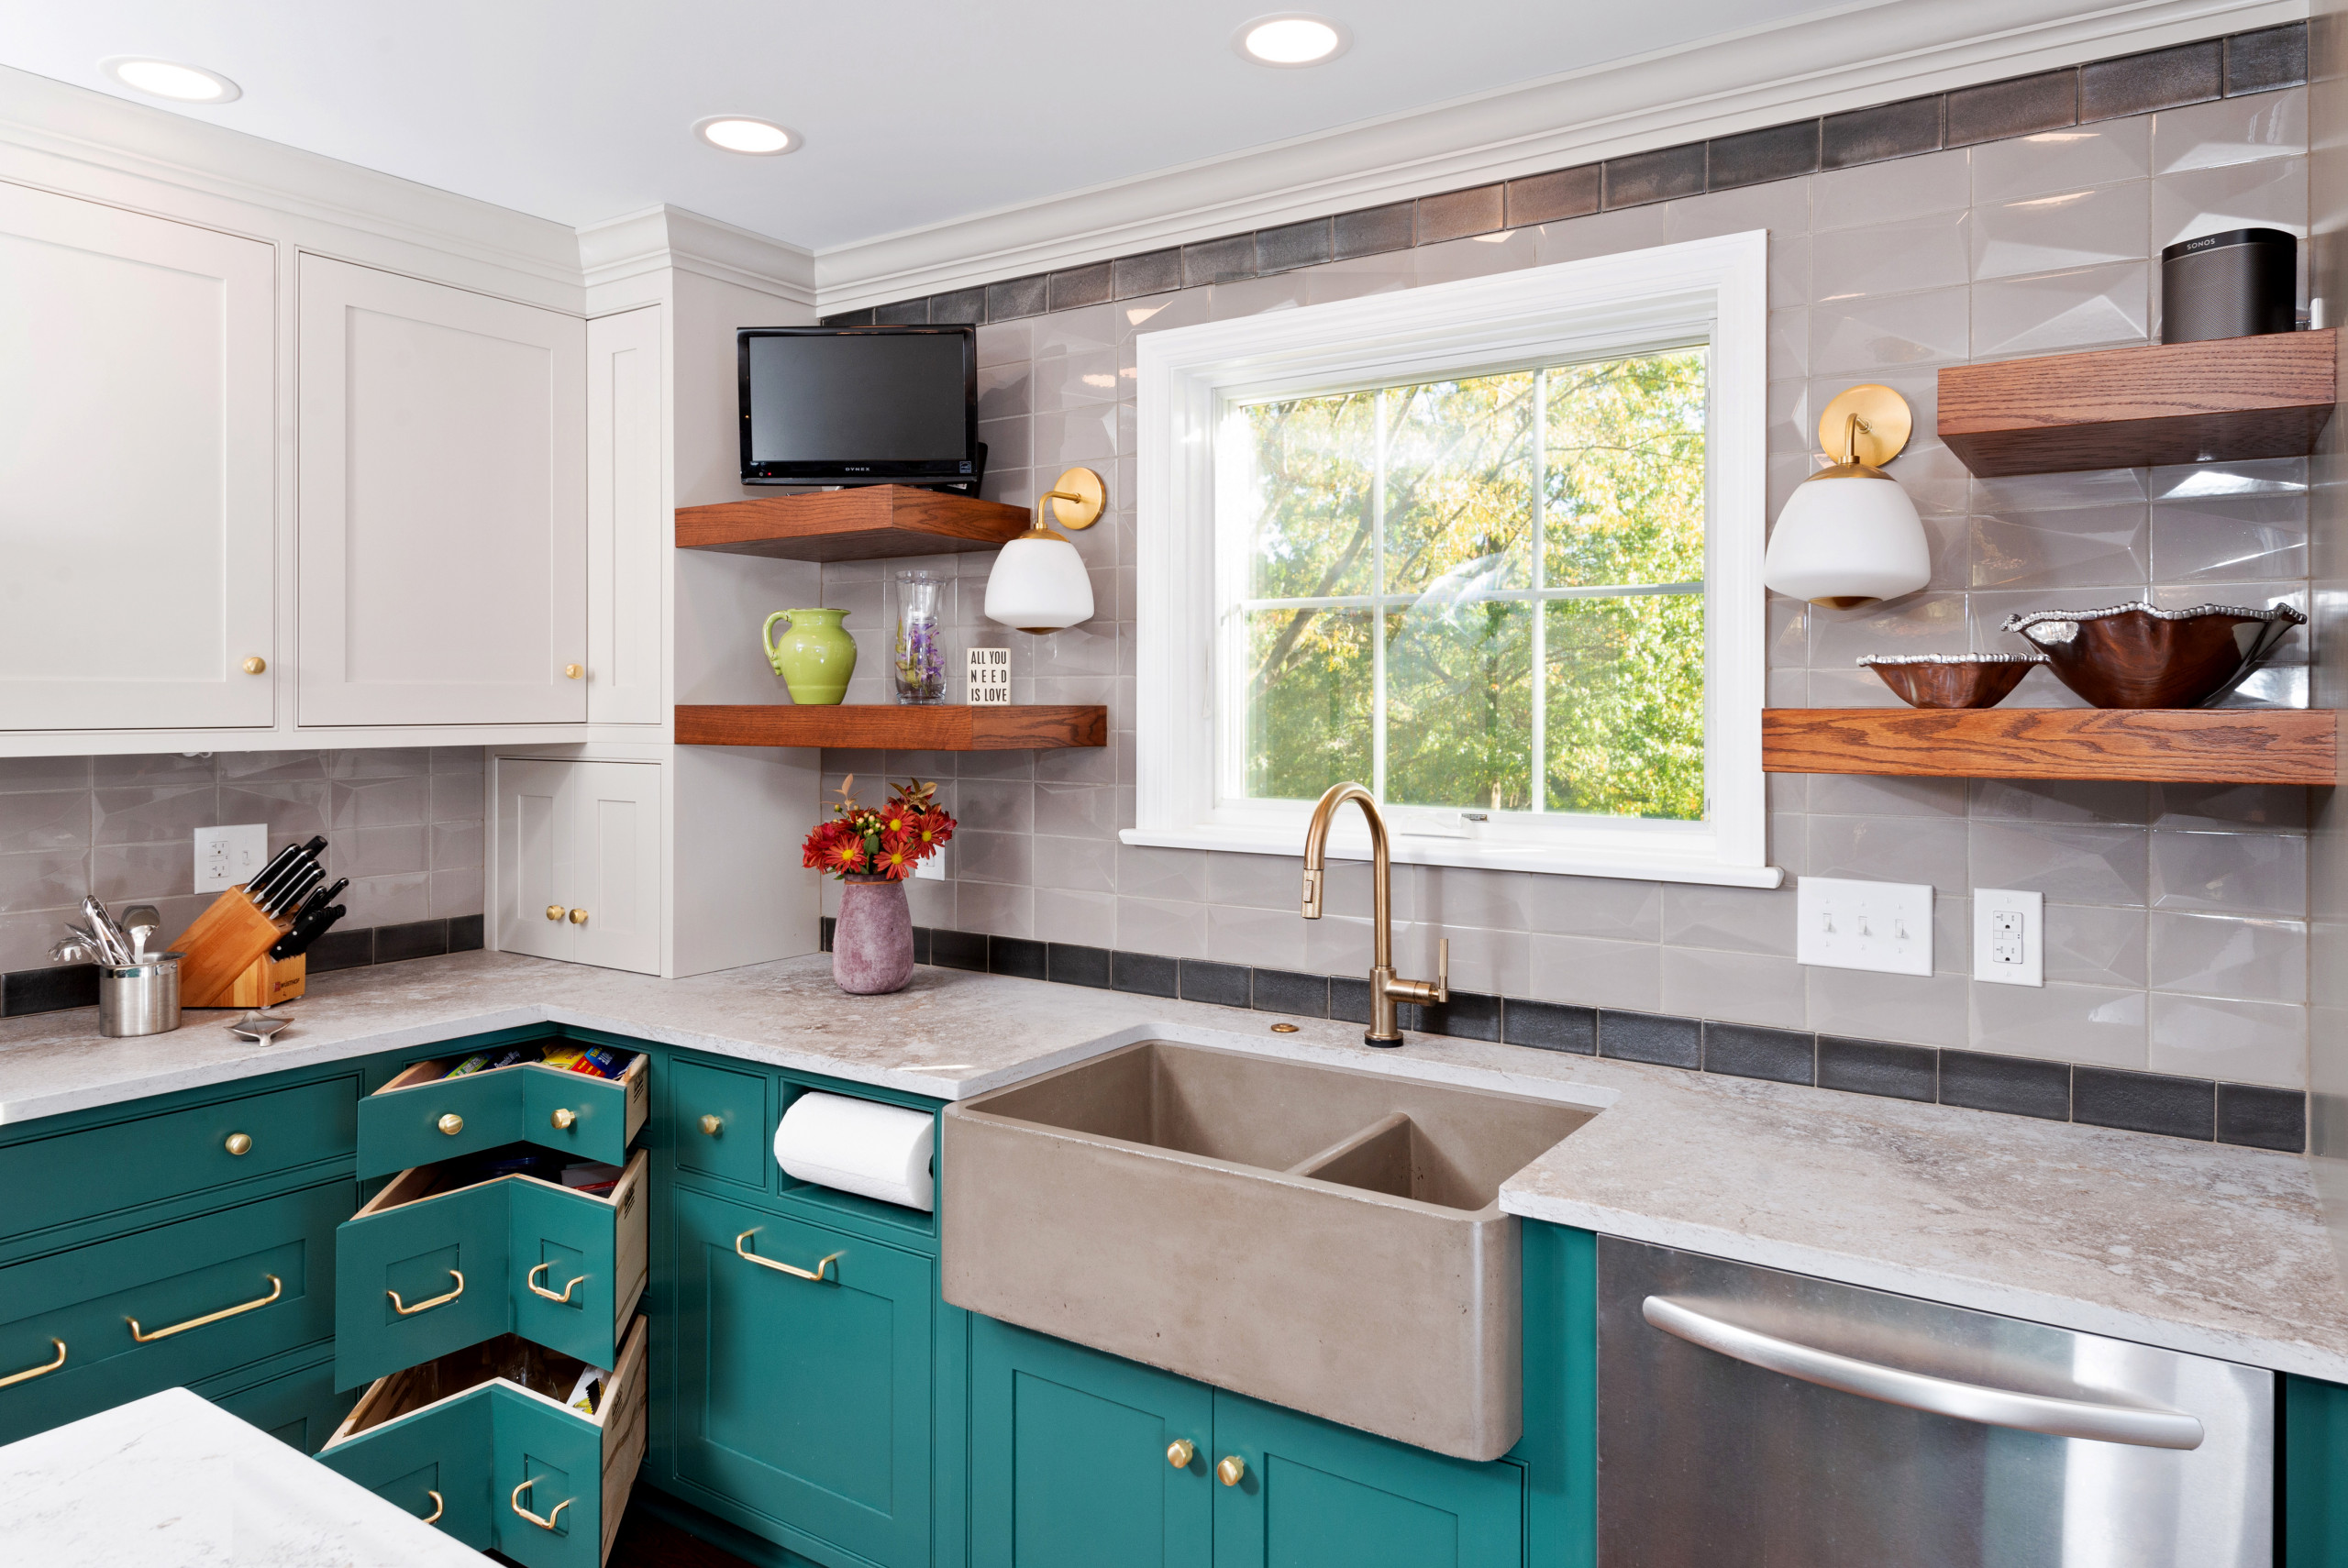 Colonial Transitional Kitchen